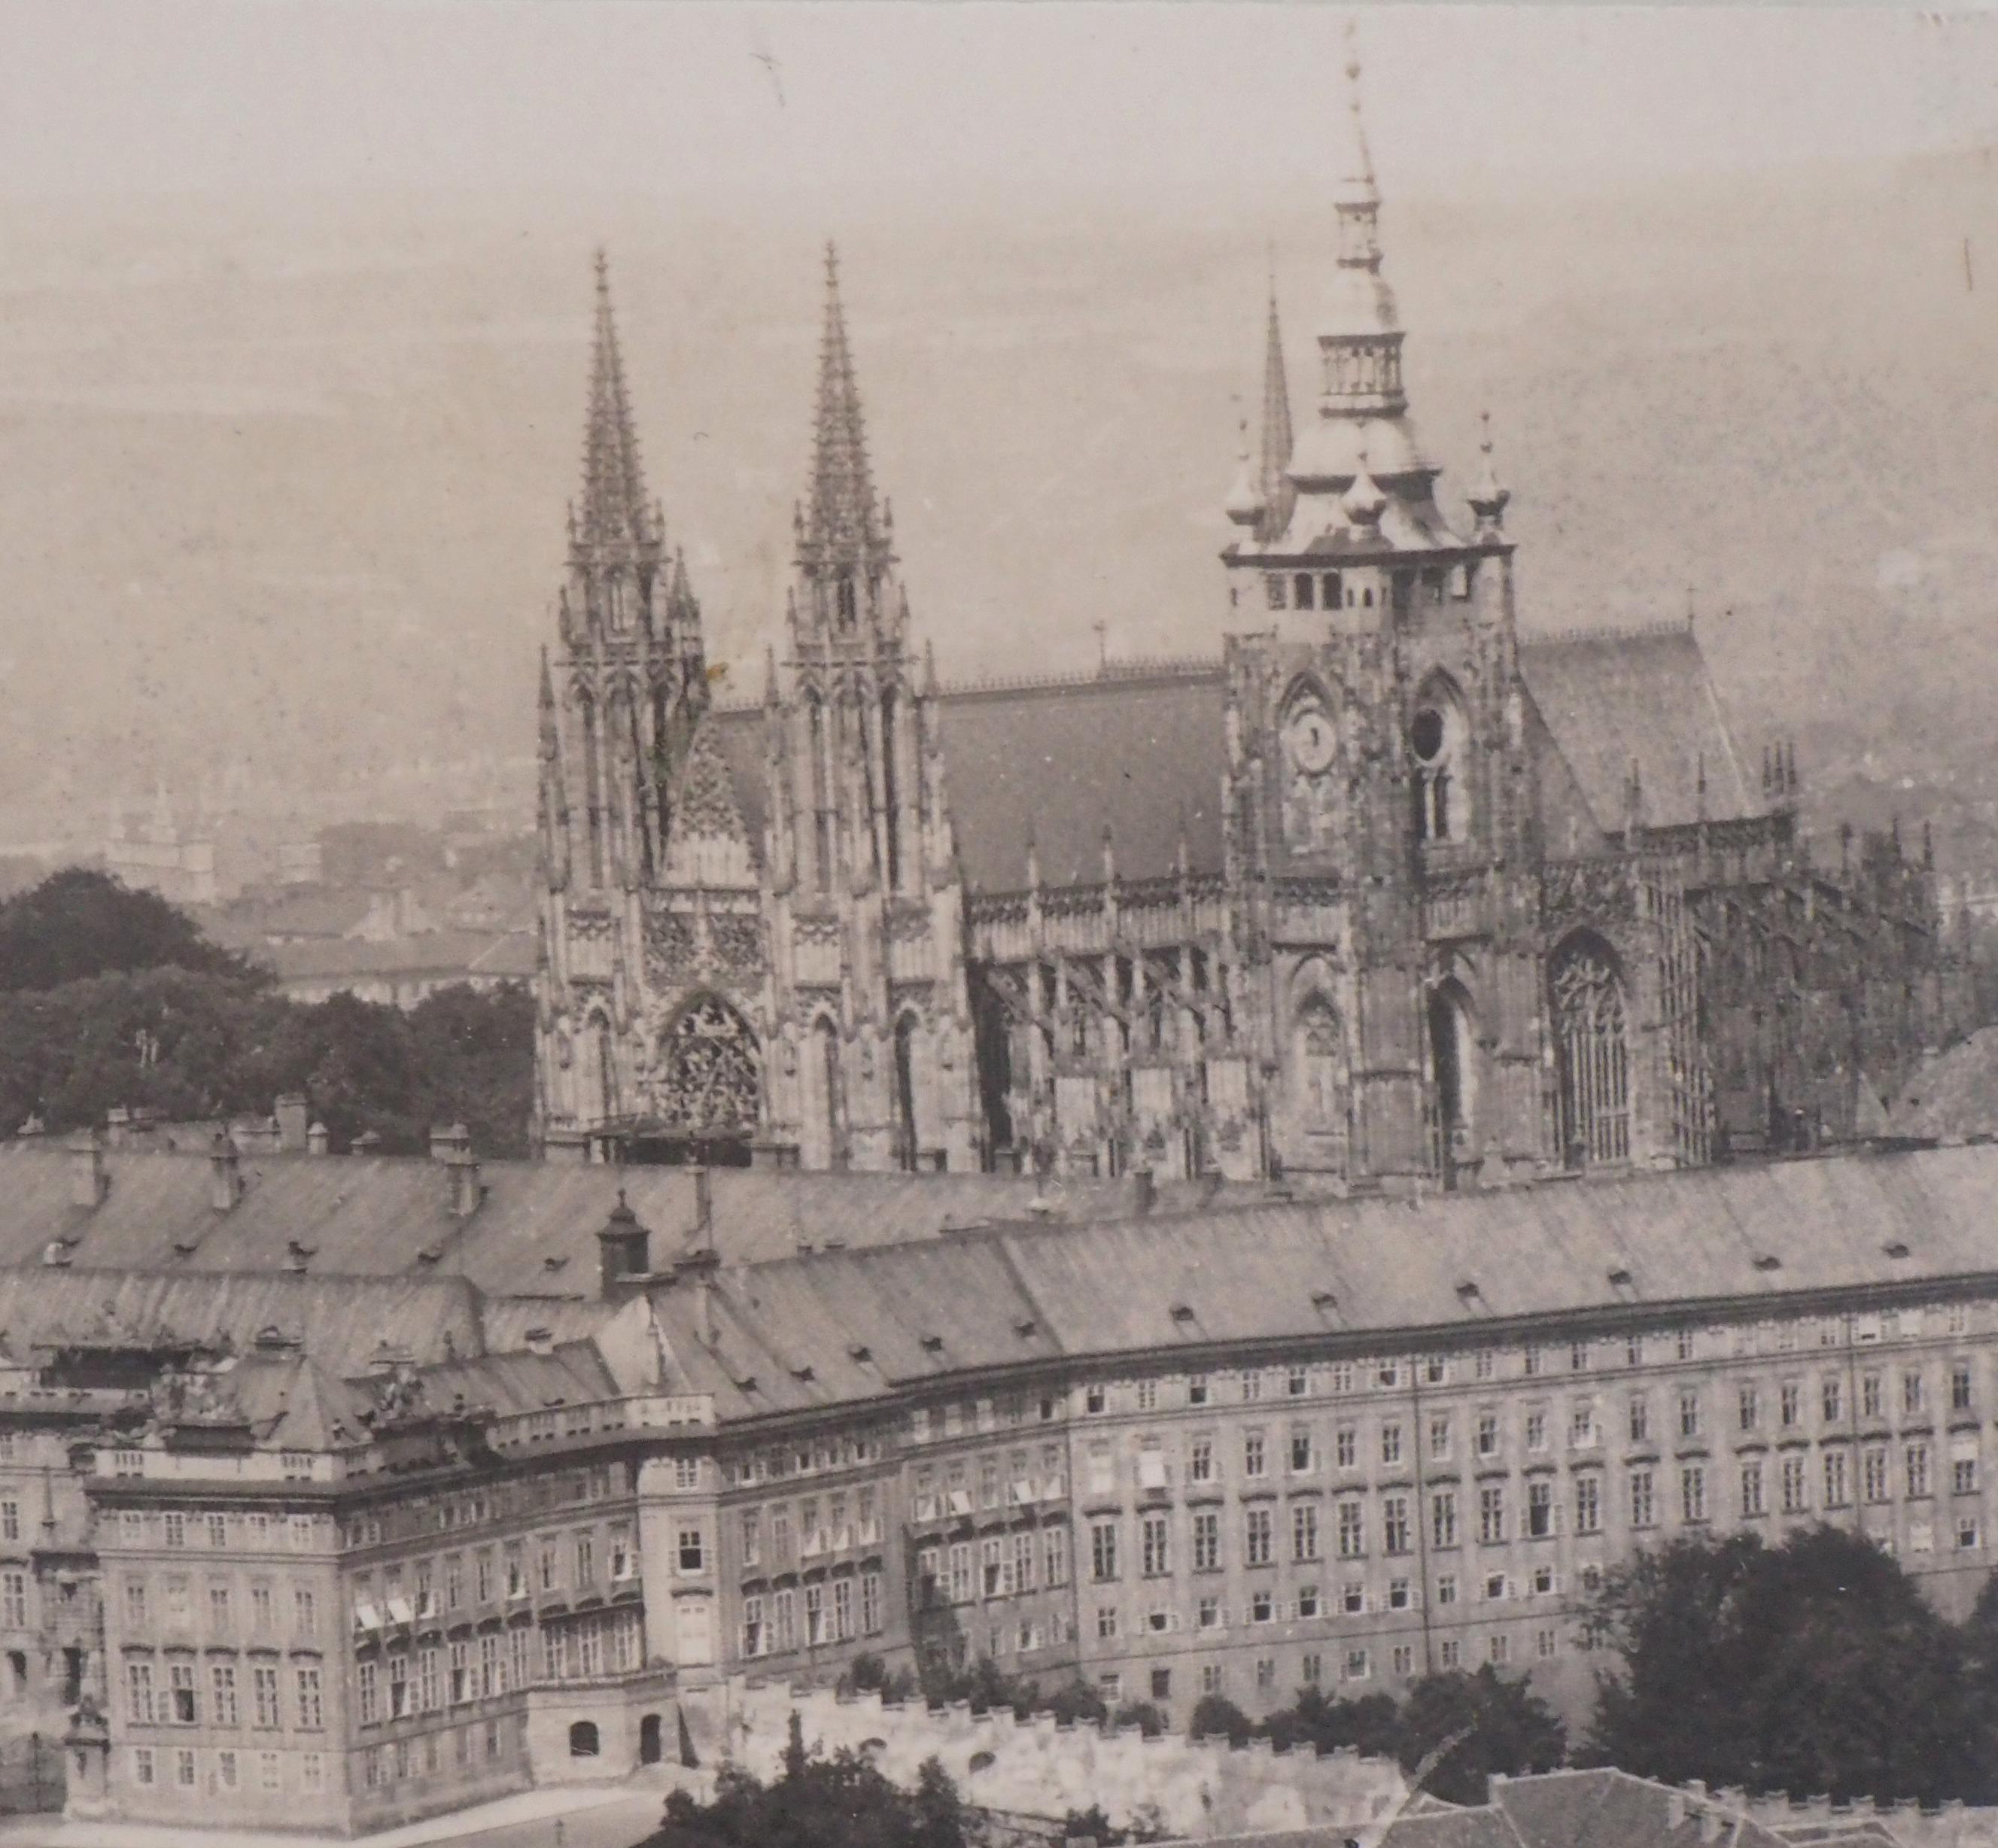 Josef Sudek
Prague Castle

Original gelatin silver photography
10 x 8.5 cm (c. 3.9 x 3.1 in)
Authenticated on the back by the workshop stamp (see picture)

Excellent condition